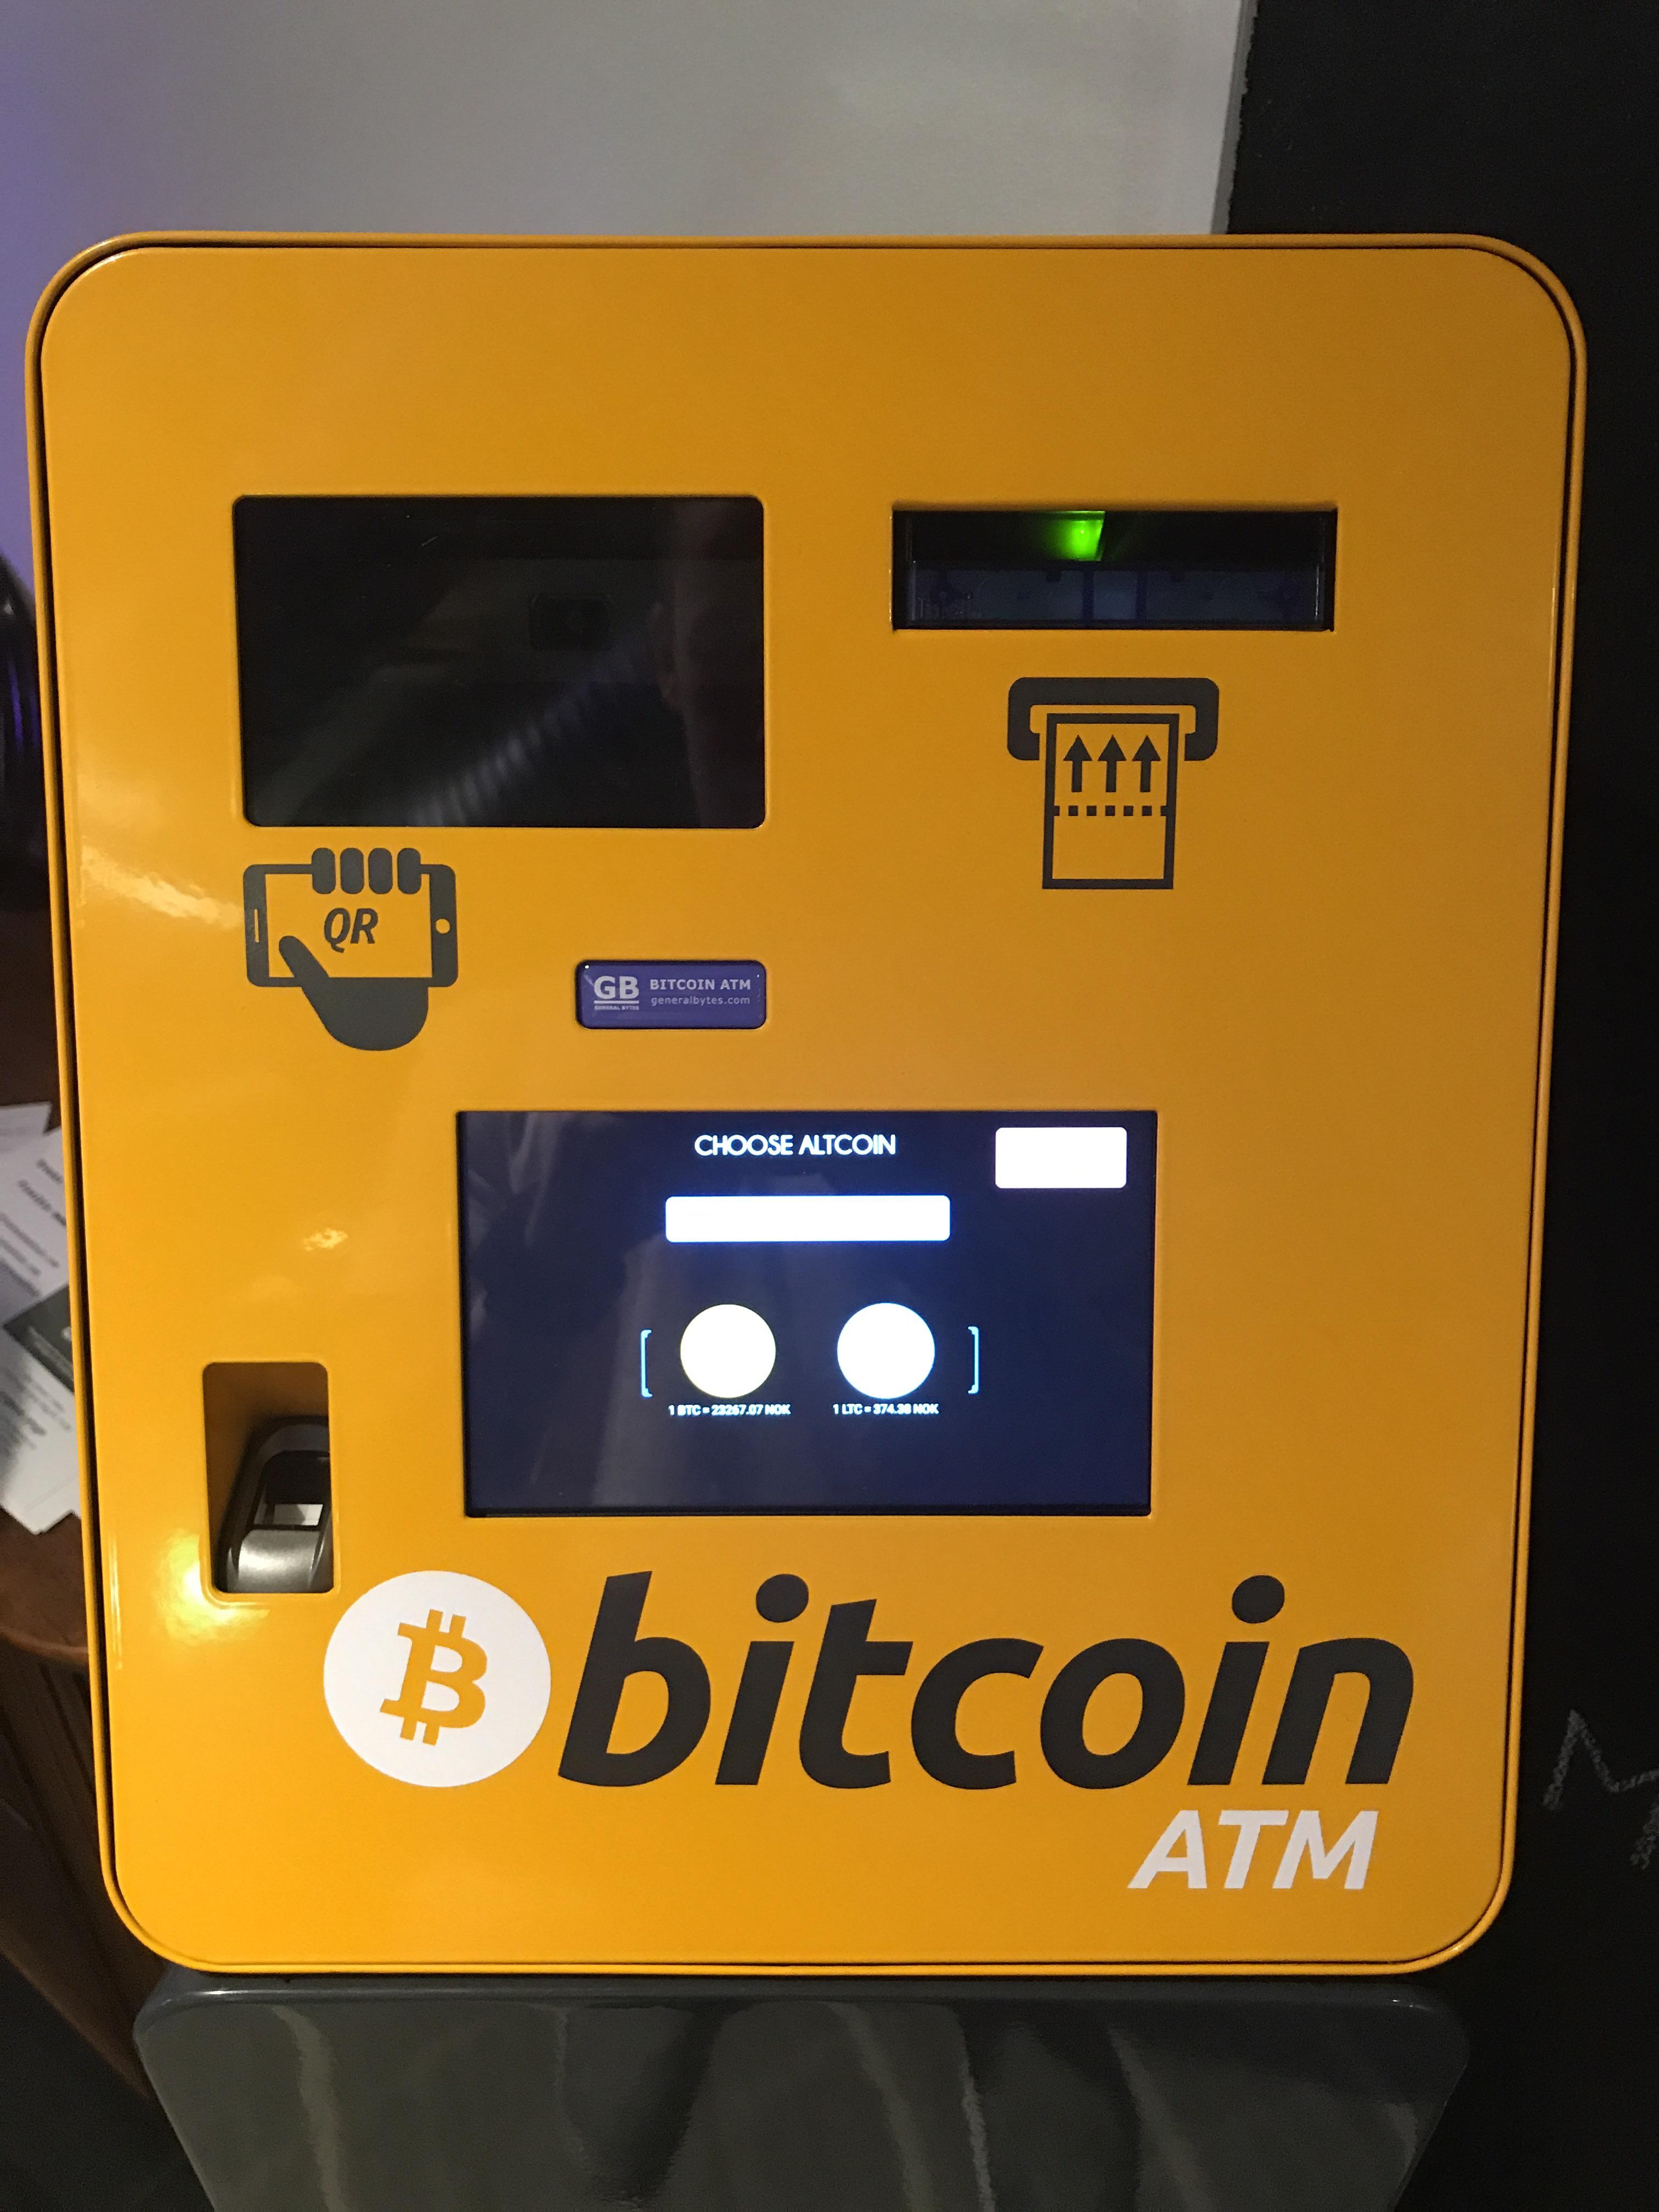 bitcoin atm withdraw cash